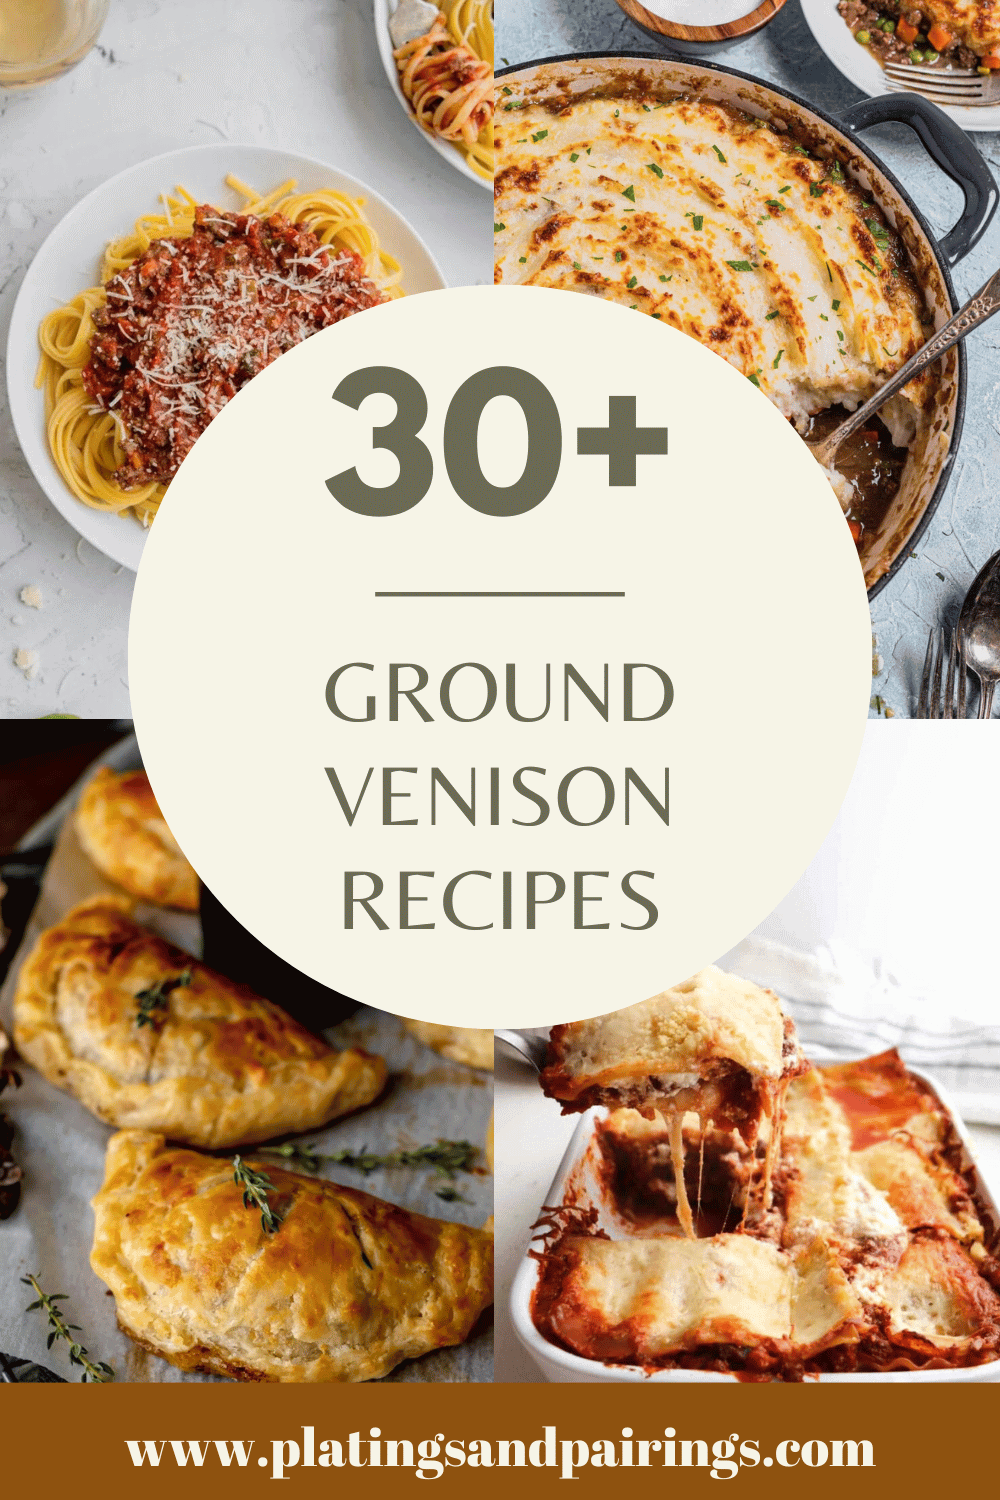 COLLAGE OF GROUND VENISON RECIPES WITH TEXT OVERLAY.